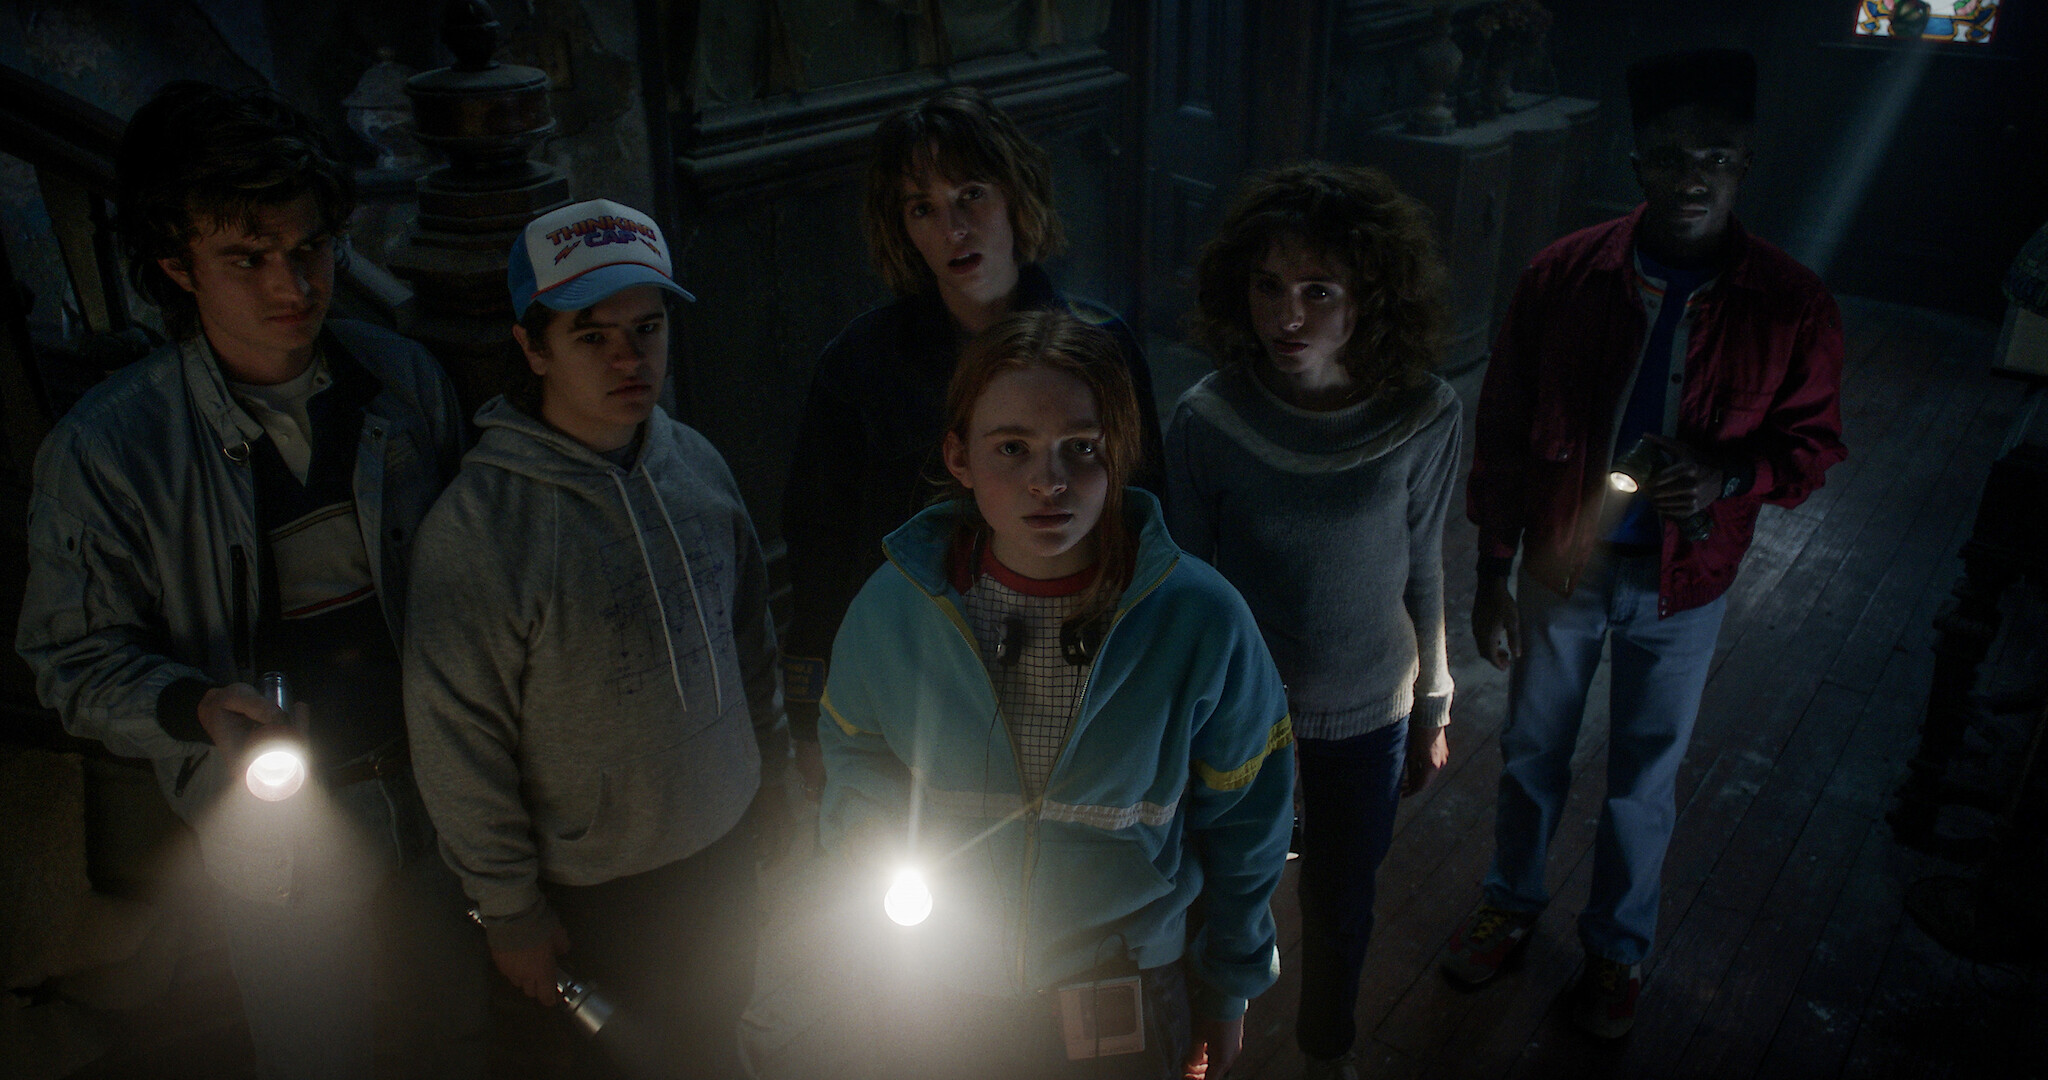 Stranger Things Season 4: 3 vital questions the Netflix show needs to answer